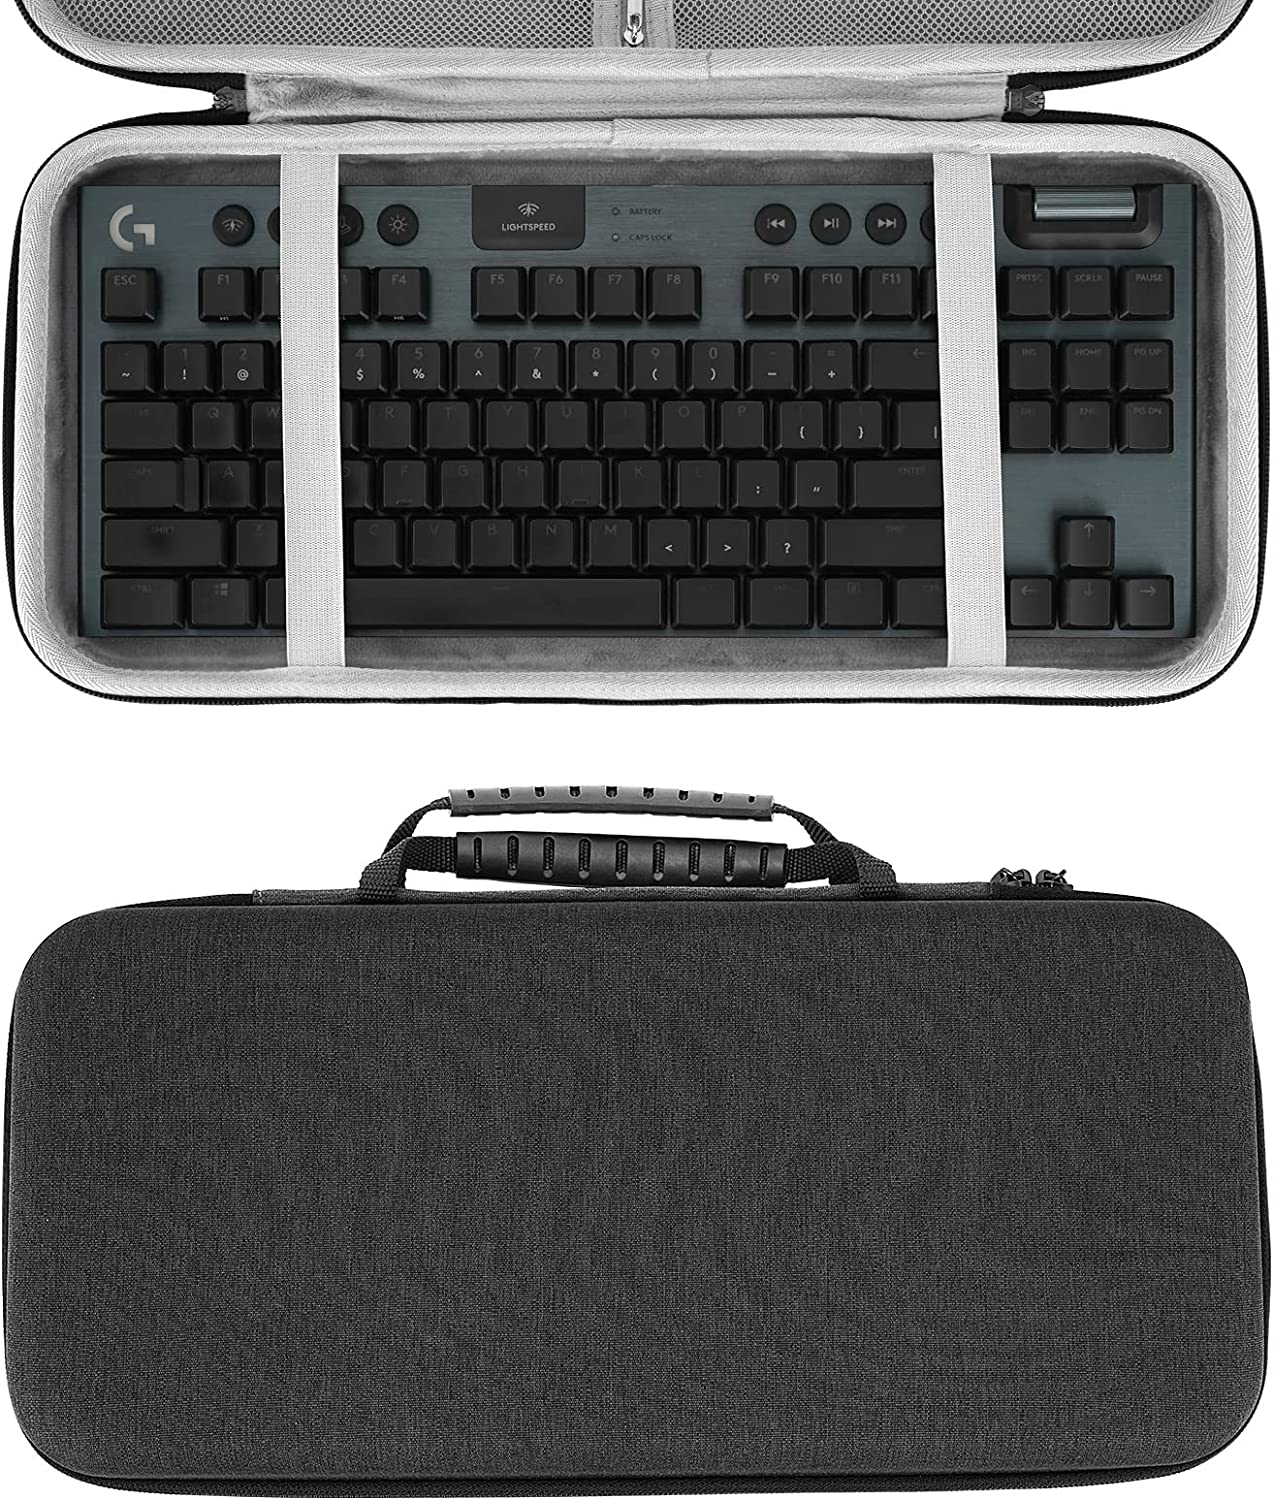 A gaming keyboard can easily be transported or packed away if it has a protective case like this.